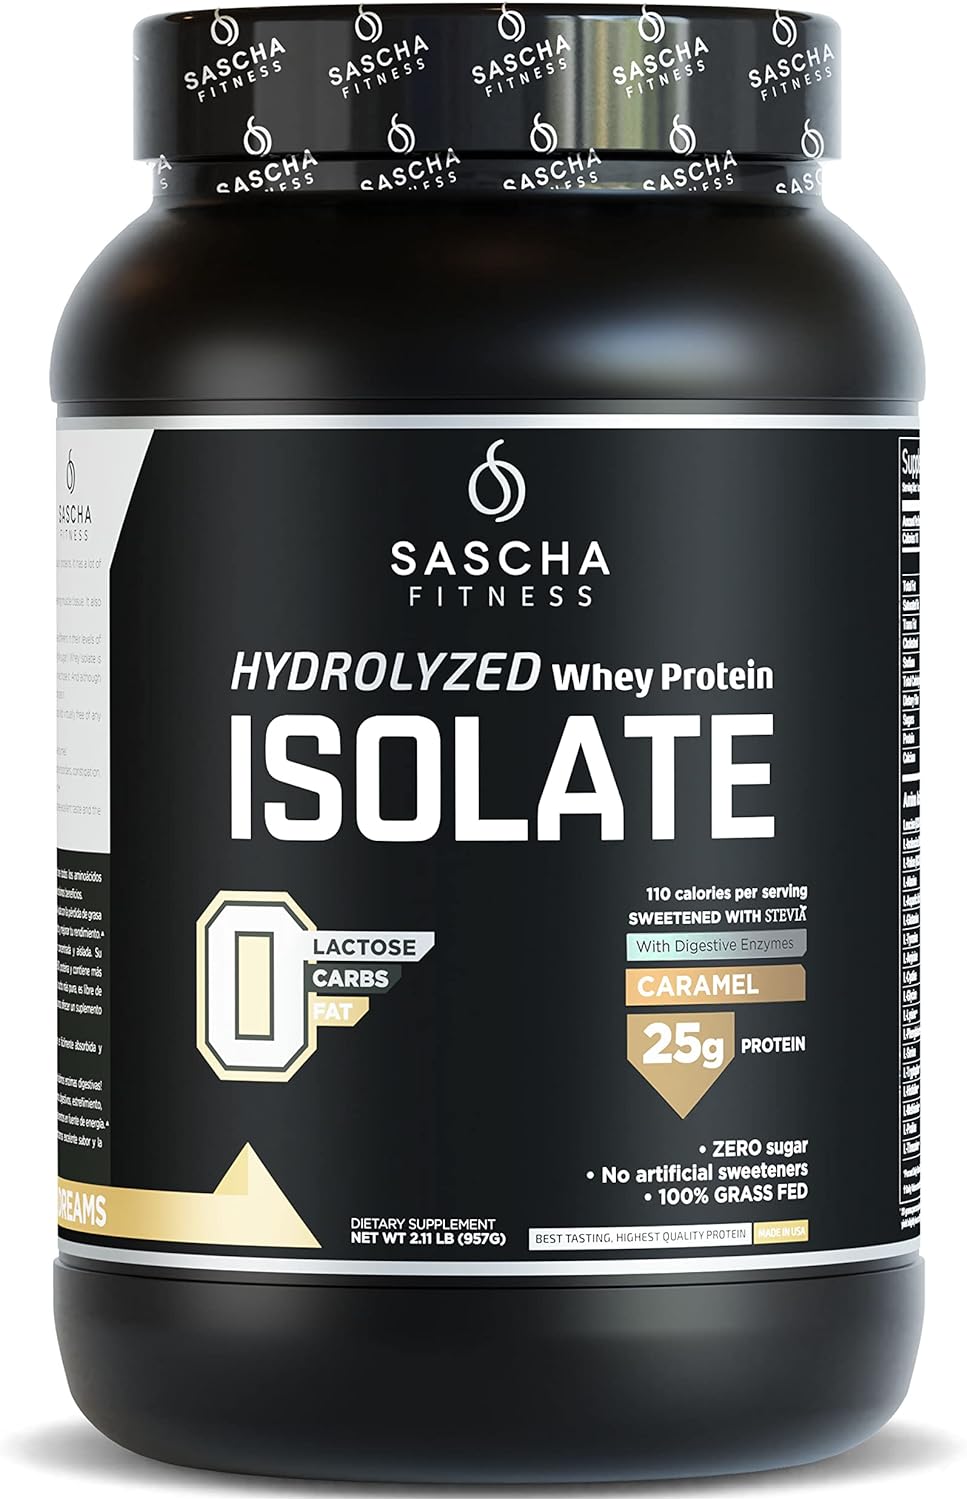 SASCHA FITNESS Hydrolyzed Whey Protein Isolate,100% Grass-Fed (2.11 Pounds) (Caramel Flavor)